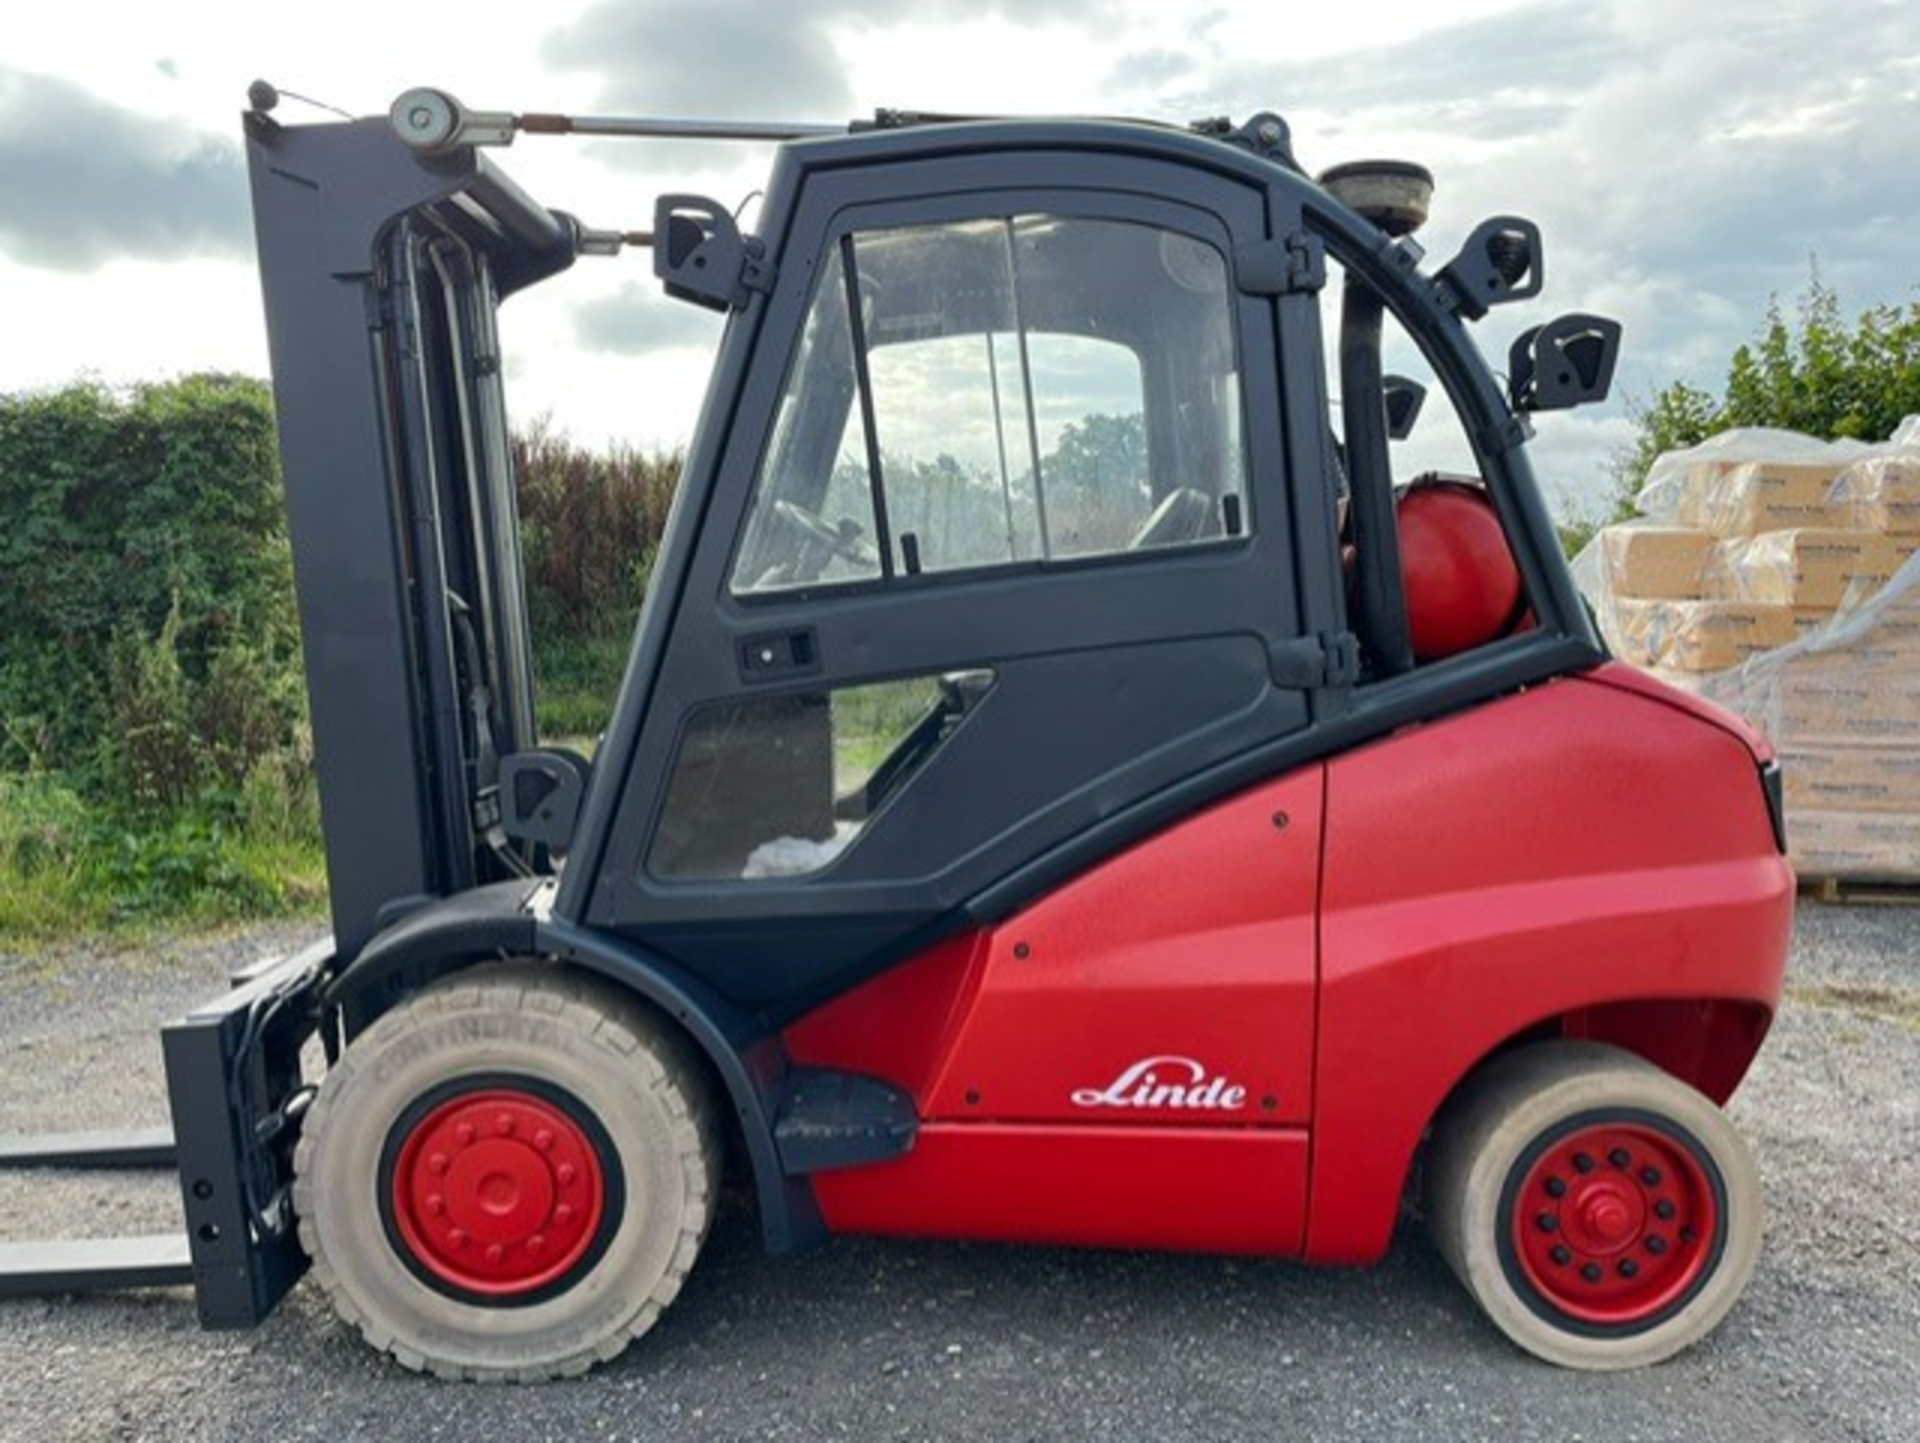 2007, LINDE H50T - 5 Tonne Gas Forklift (Ex Contract Hire) - Image 2 of 6